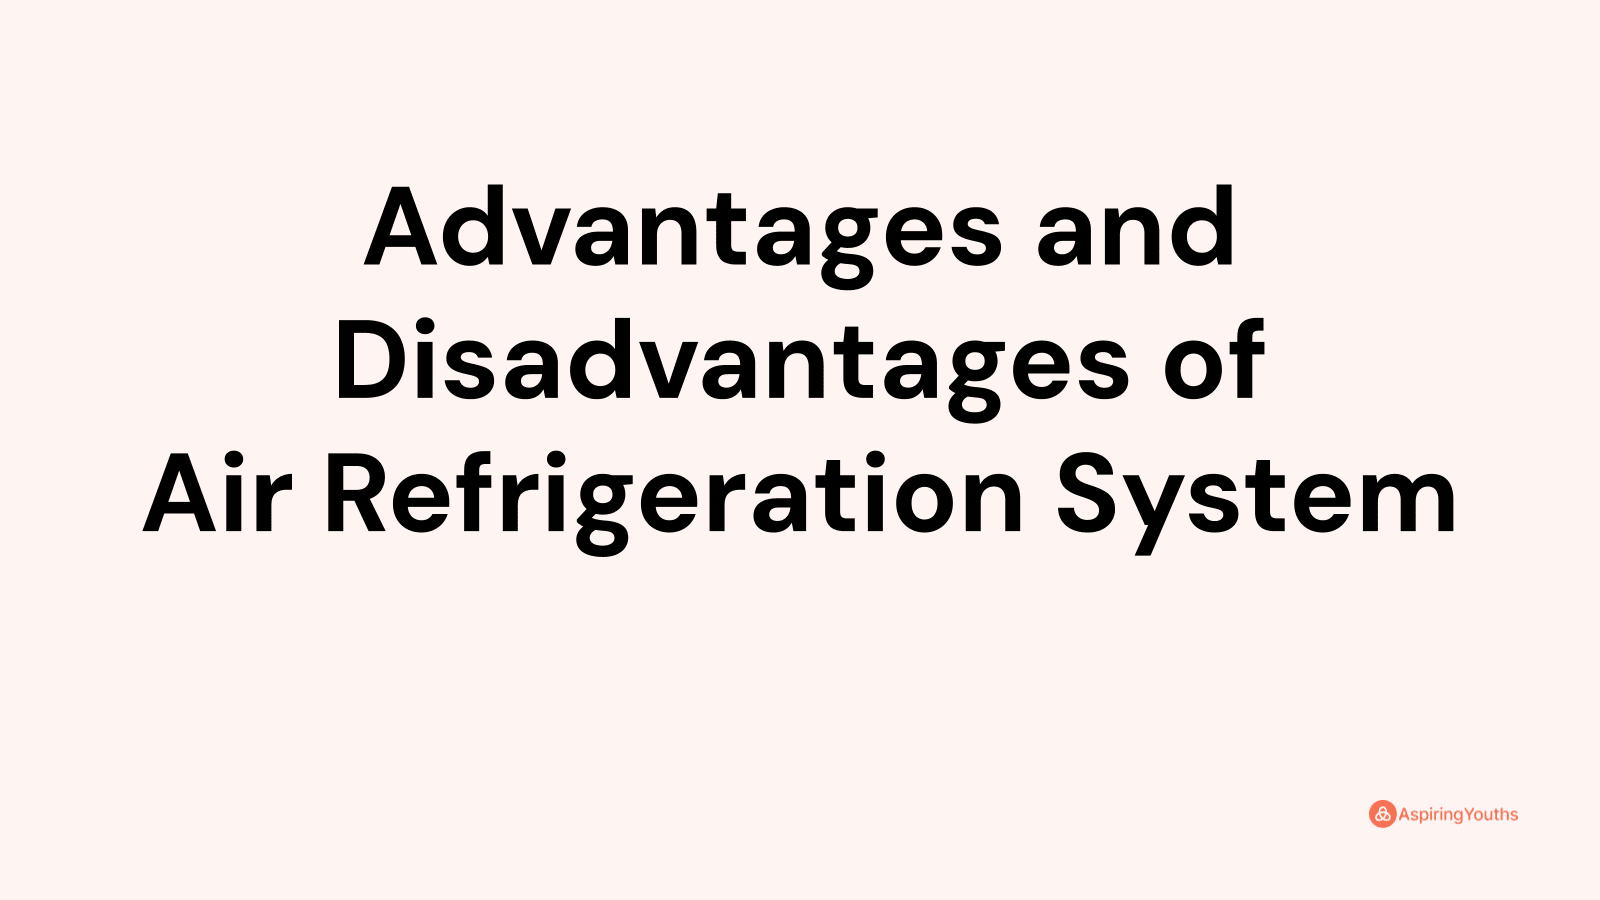 Advantages and disadvantages of Air Refrigeration System